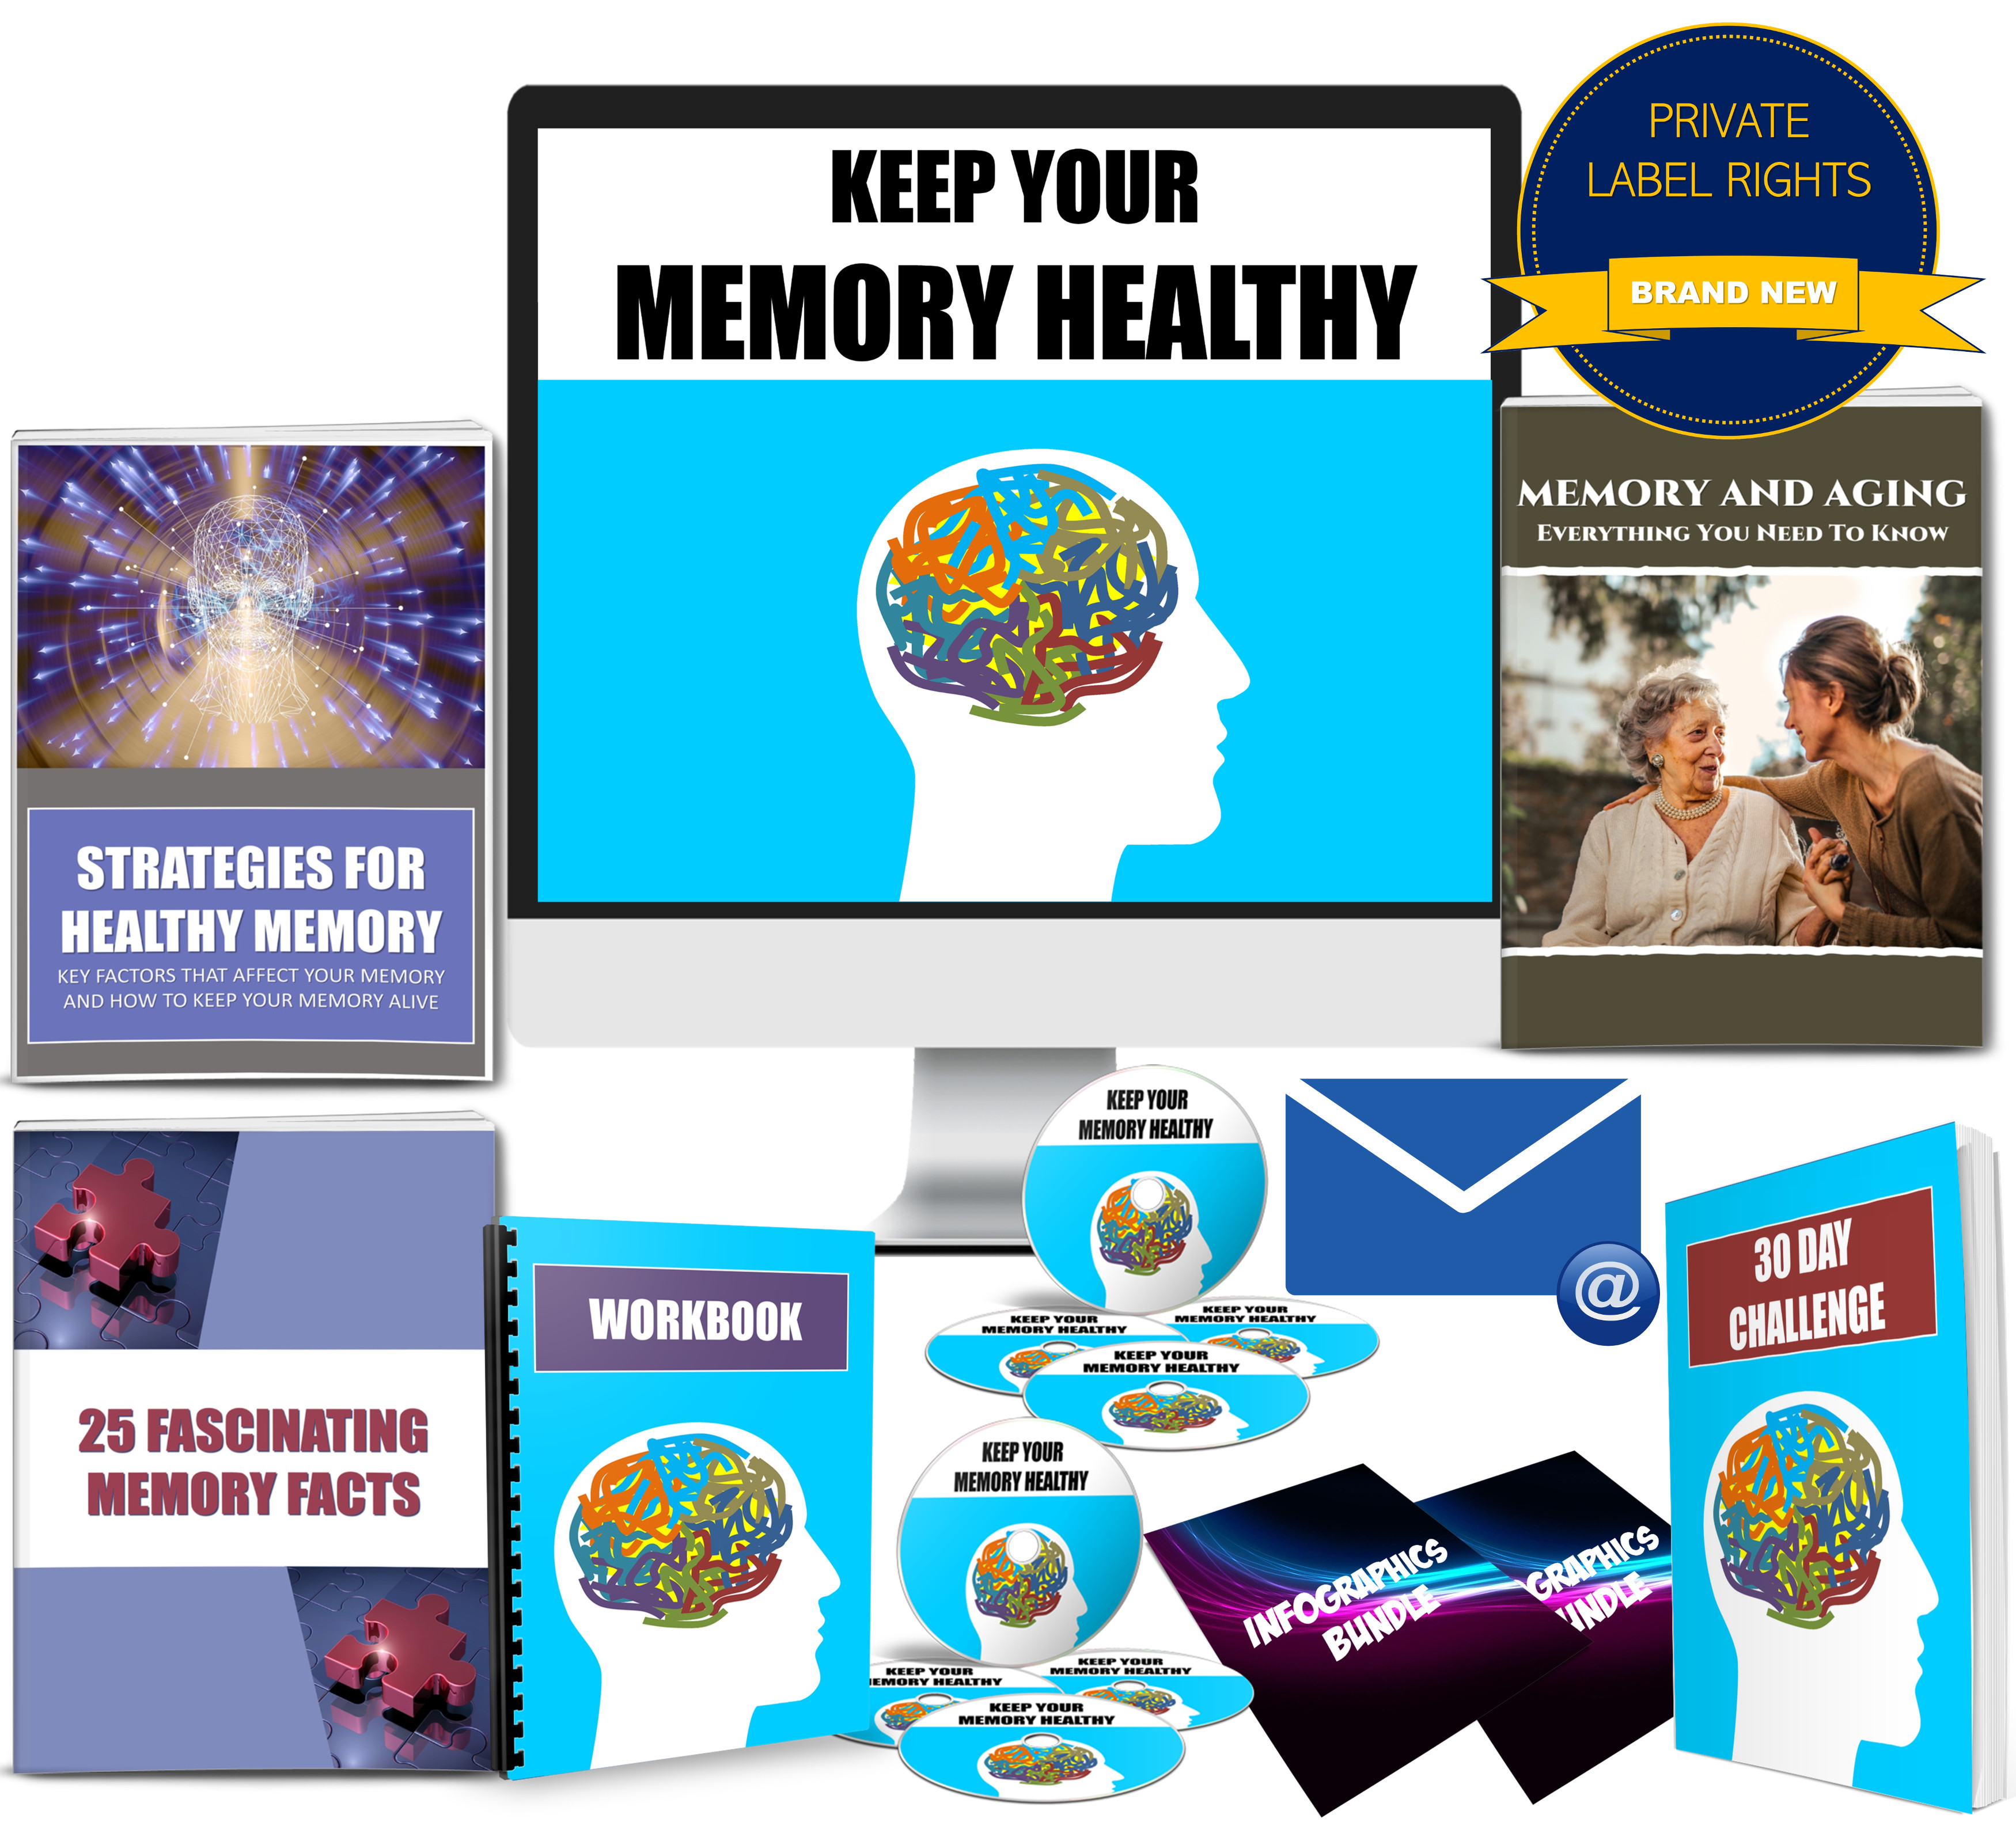 KEEP YOUR MEMORY HEALTHY Content with PLR Rights